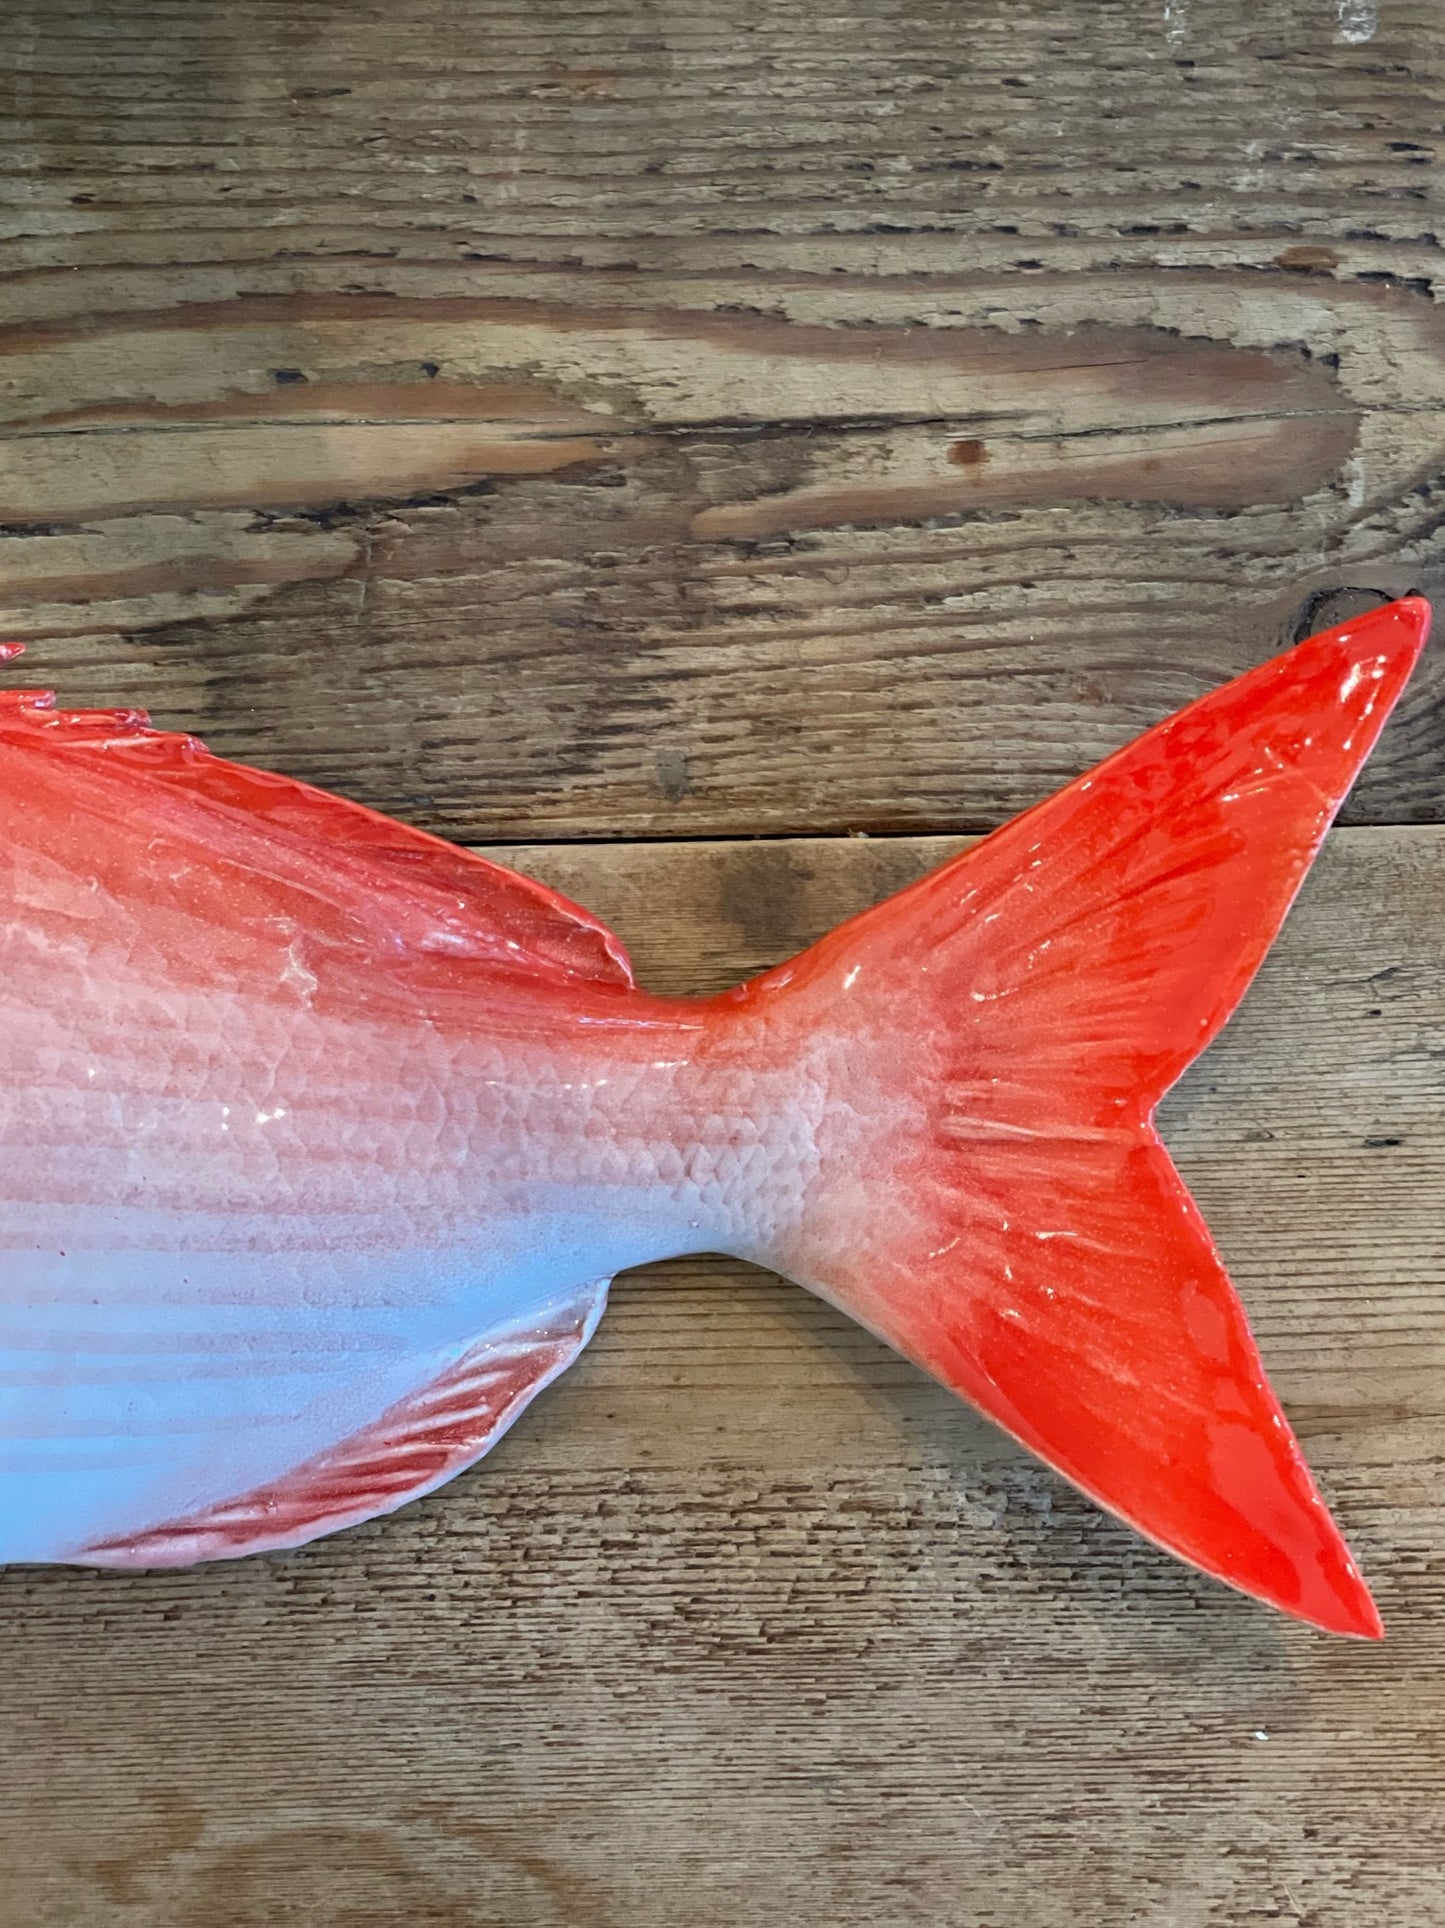 Pagro Grande  -  Large Red Snapper